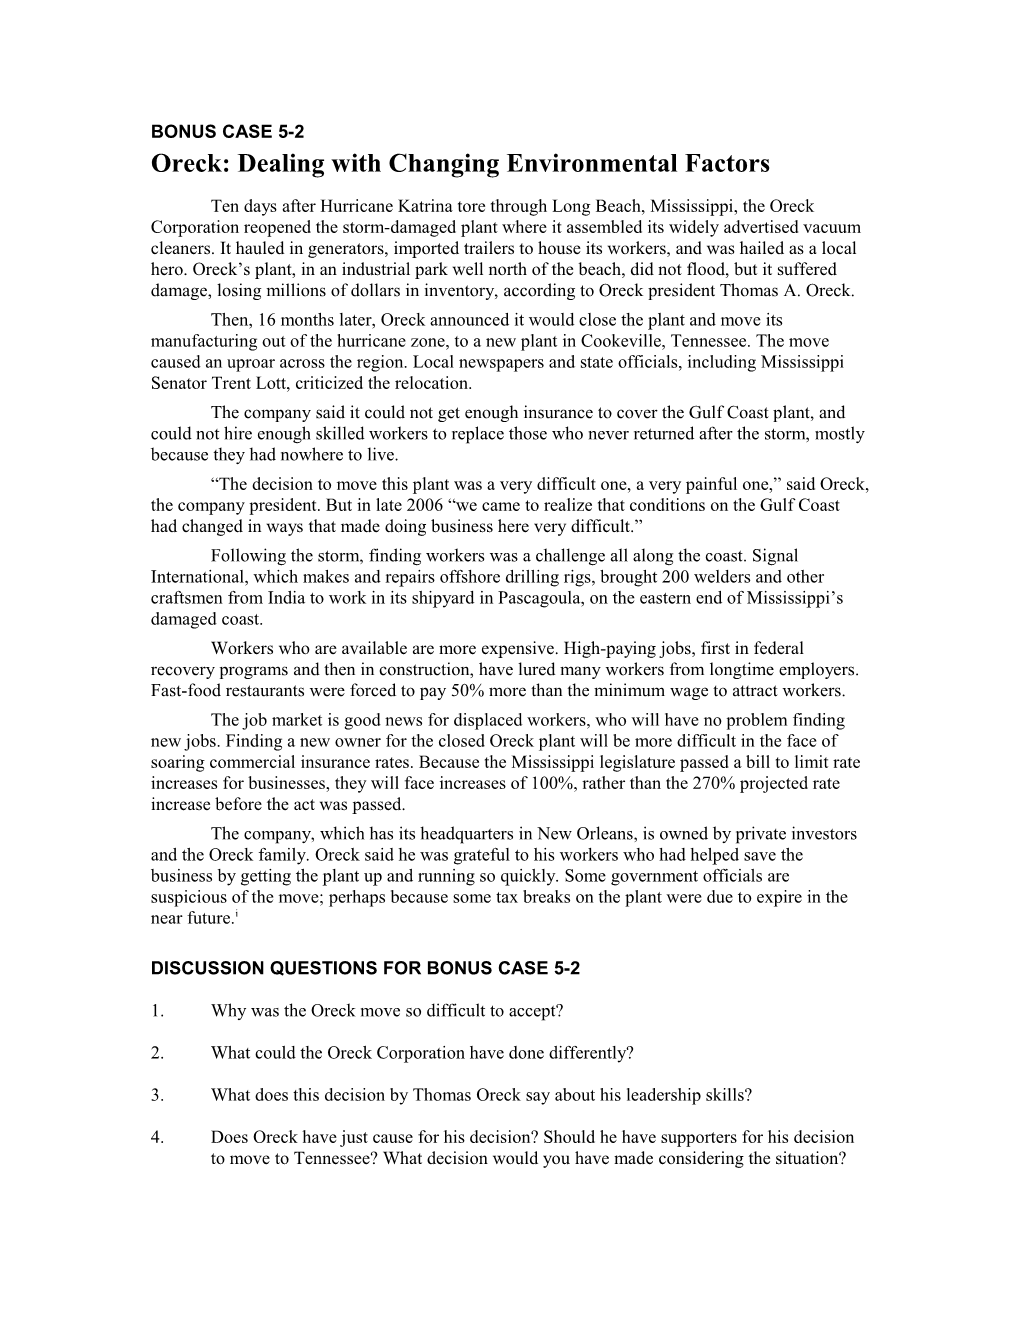 Oreck: Dealing with Changing Environmental Factors